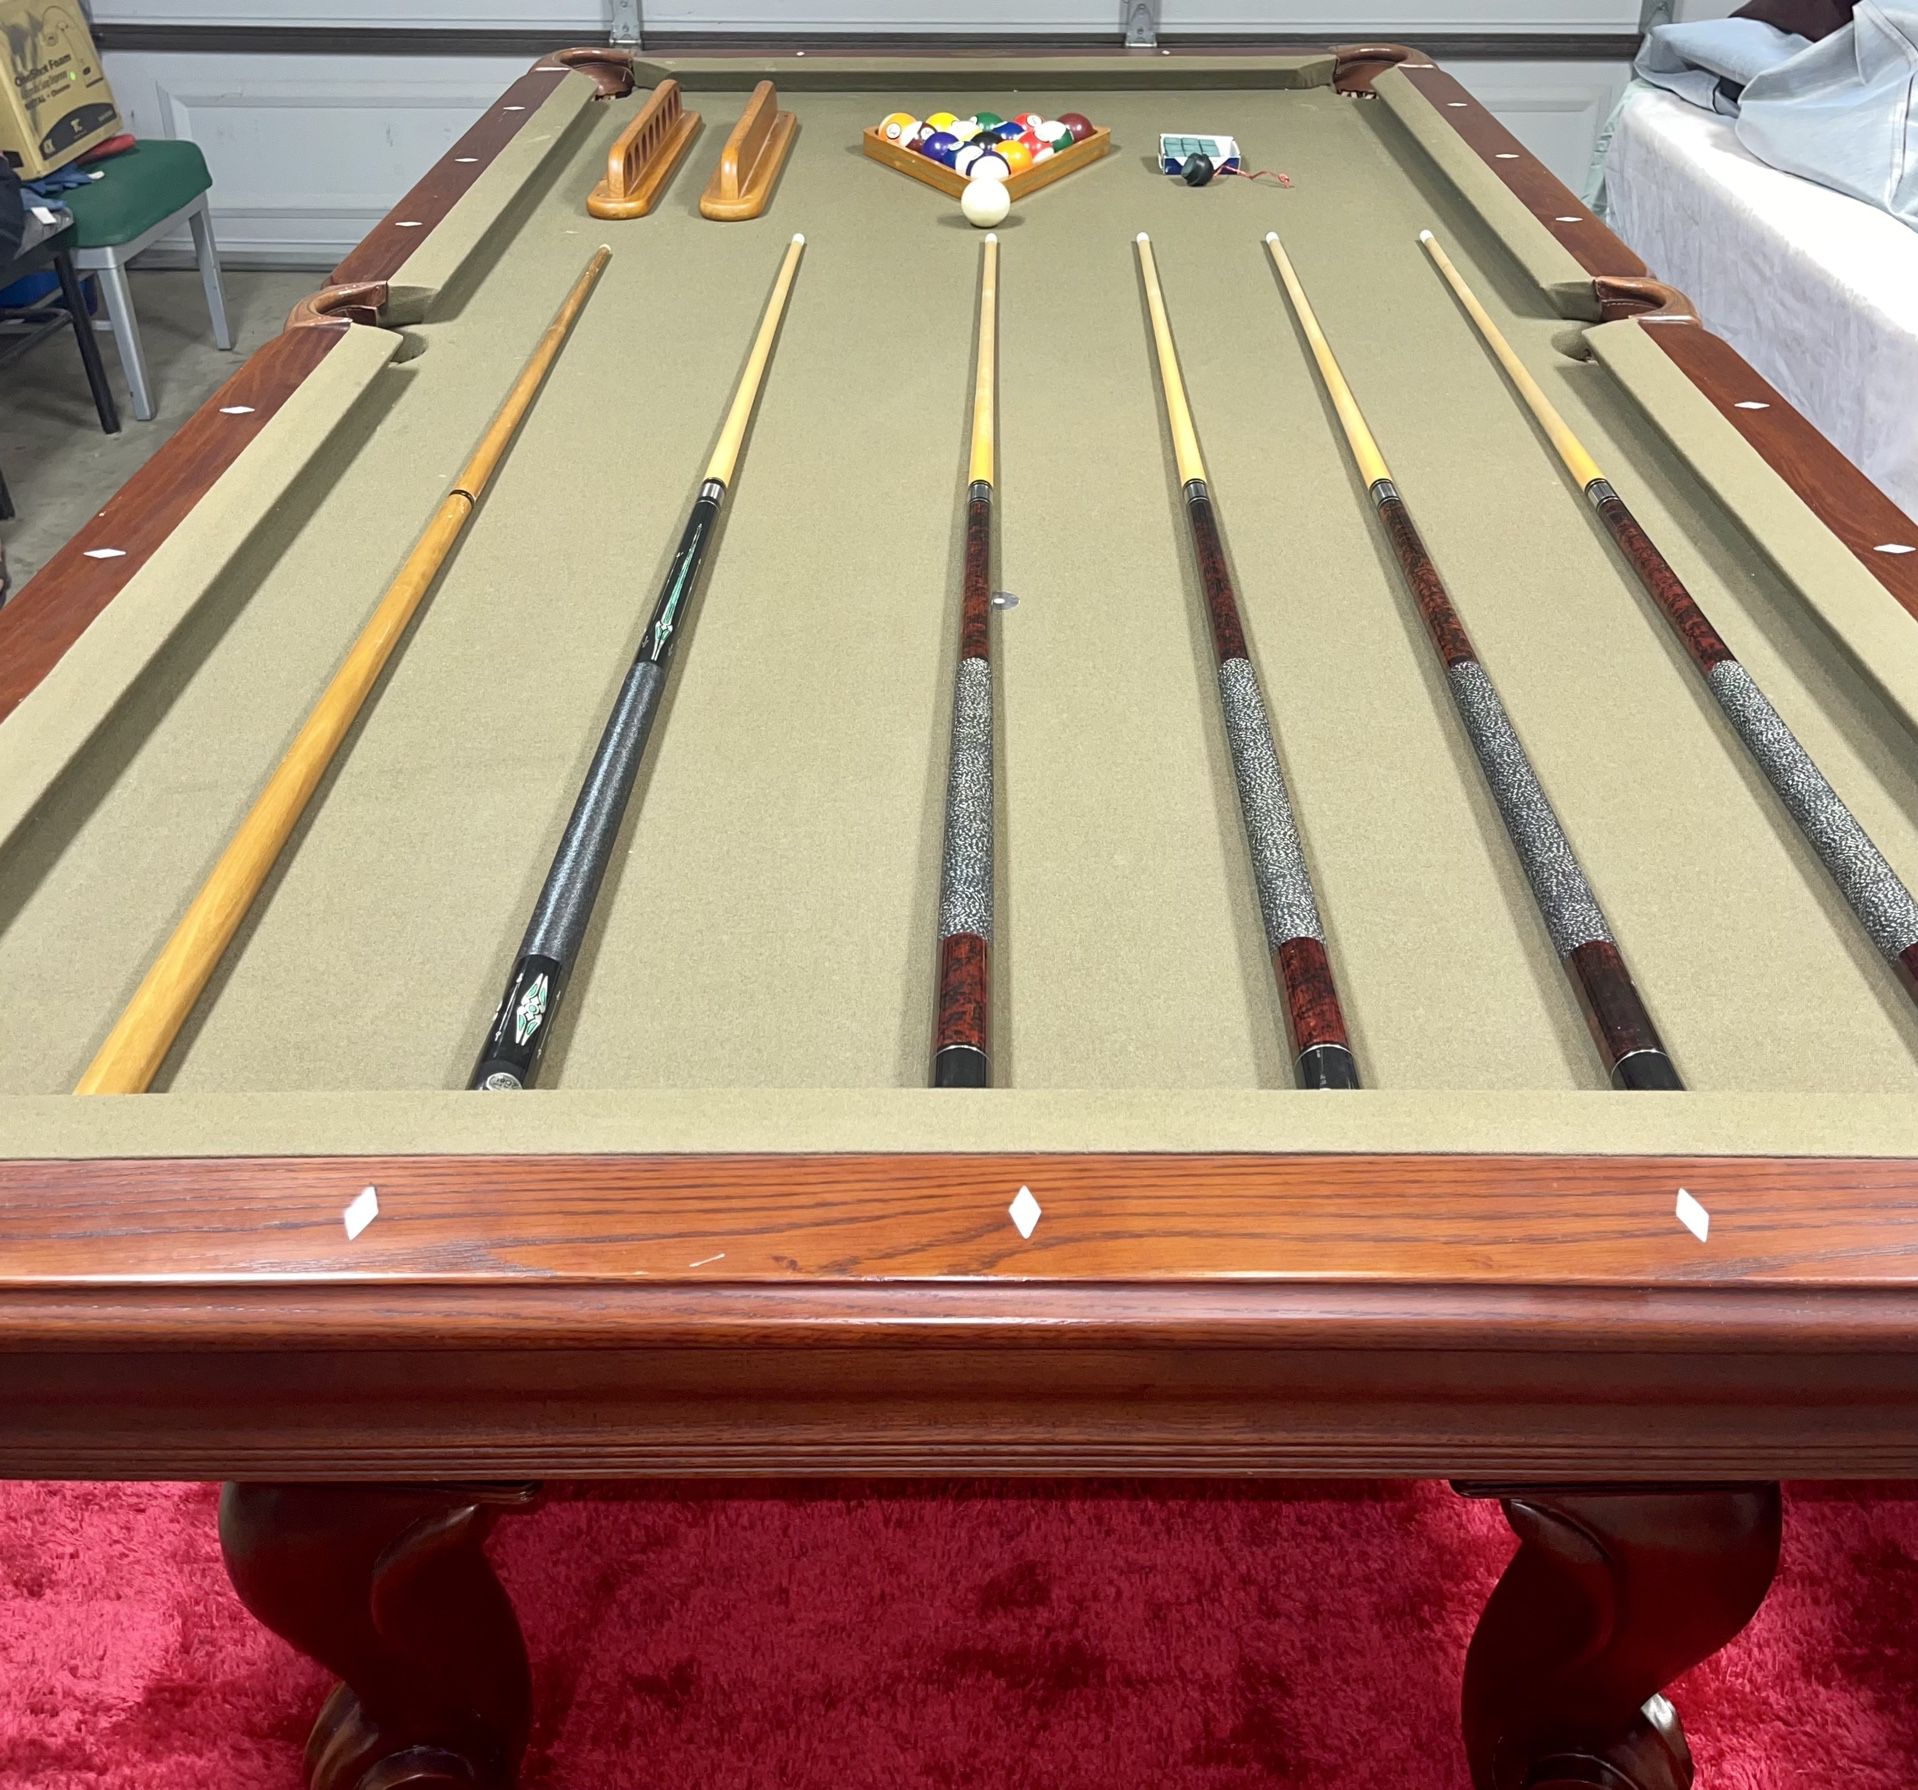 Pool Table (With Delivery)